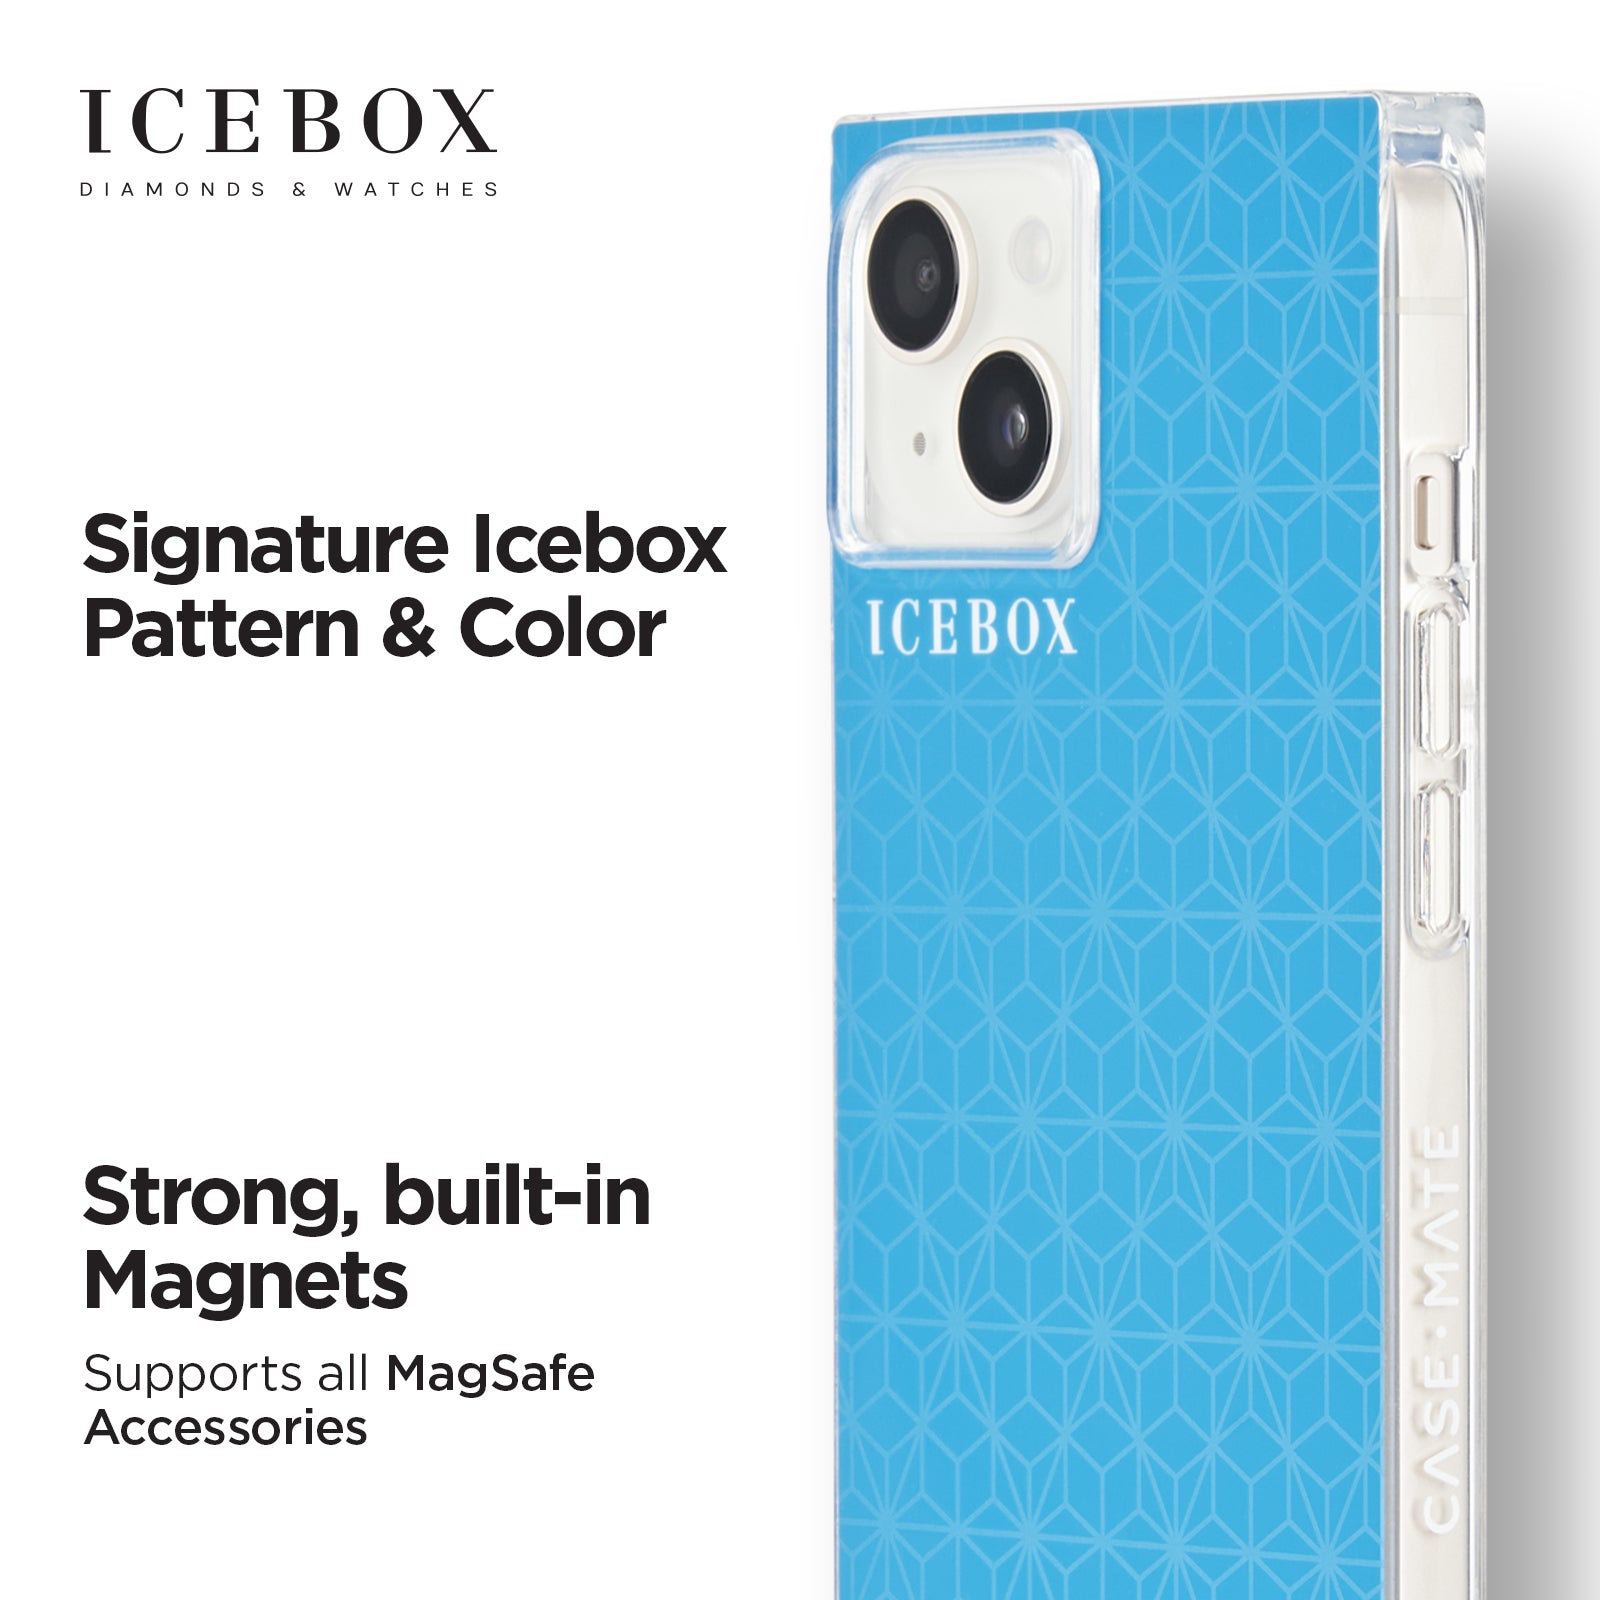 SIGNATURE ICEBOX PATTERN AND COLOR. STRONG, BUILT-IN MAGNETS SUPPORTS ALL MAGSAFE ACCESSORIES.